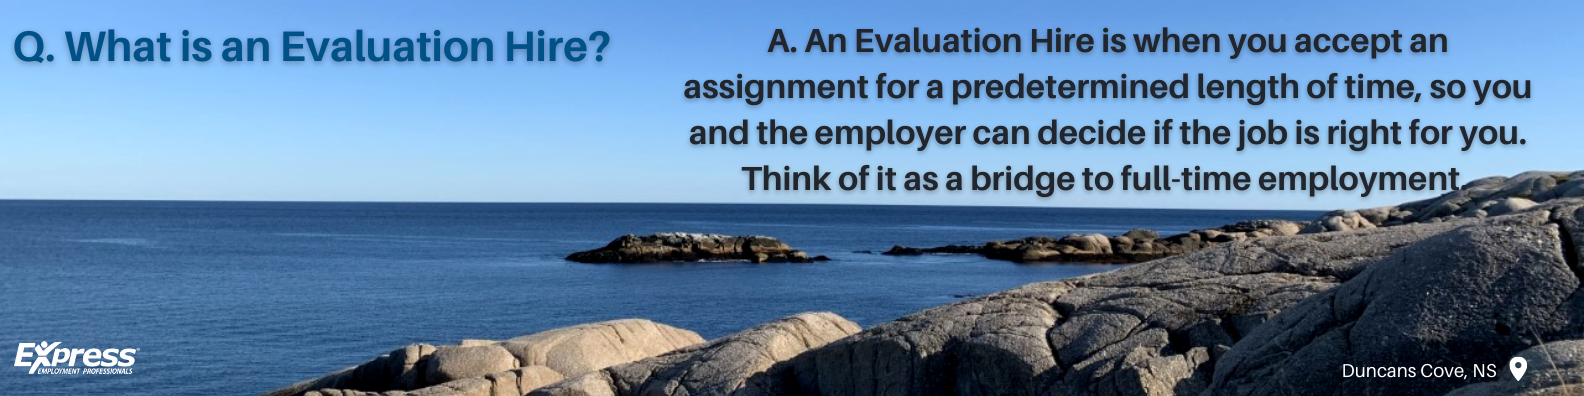 Evaluation hire banner